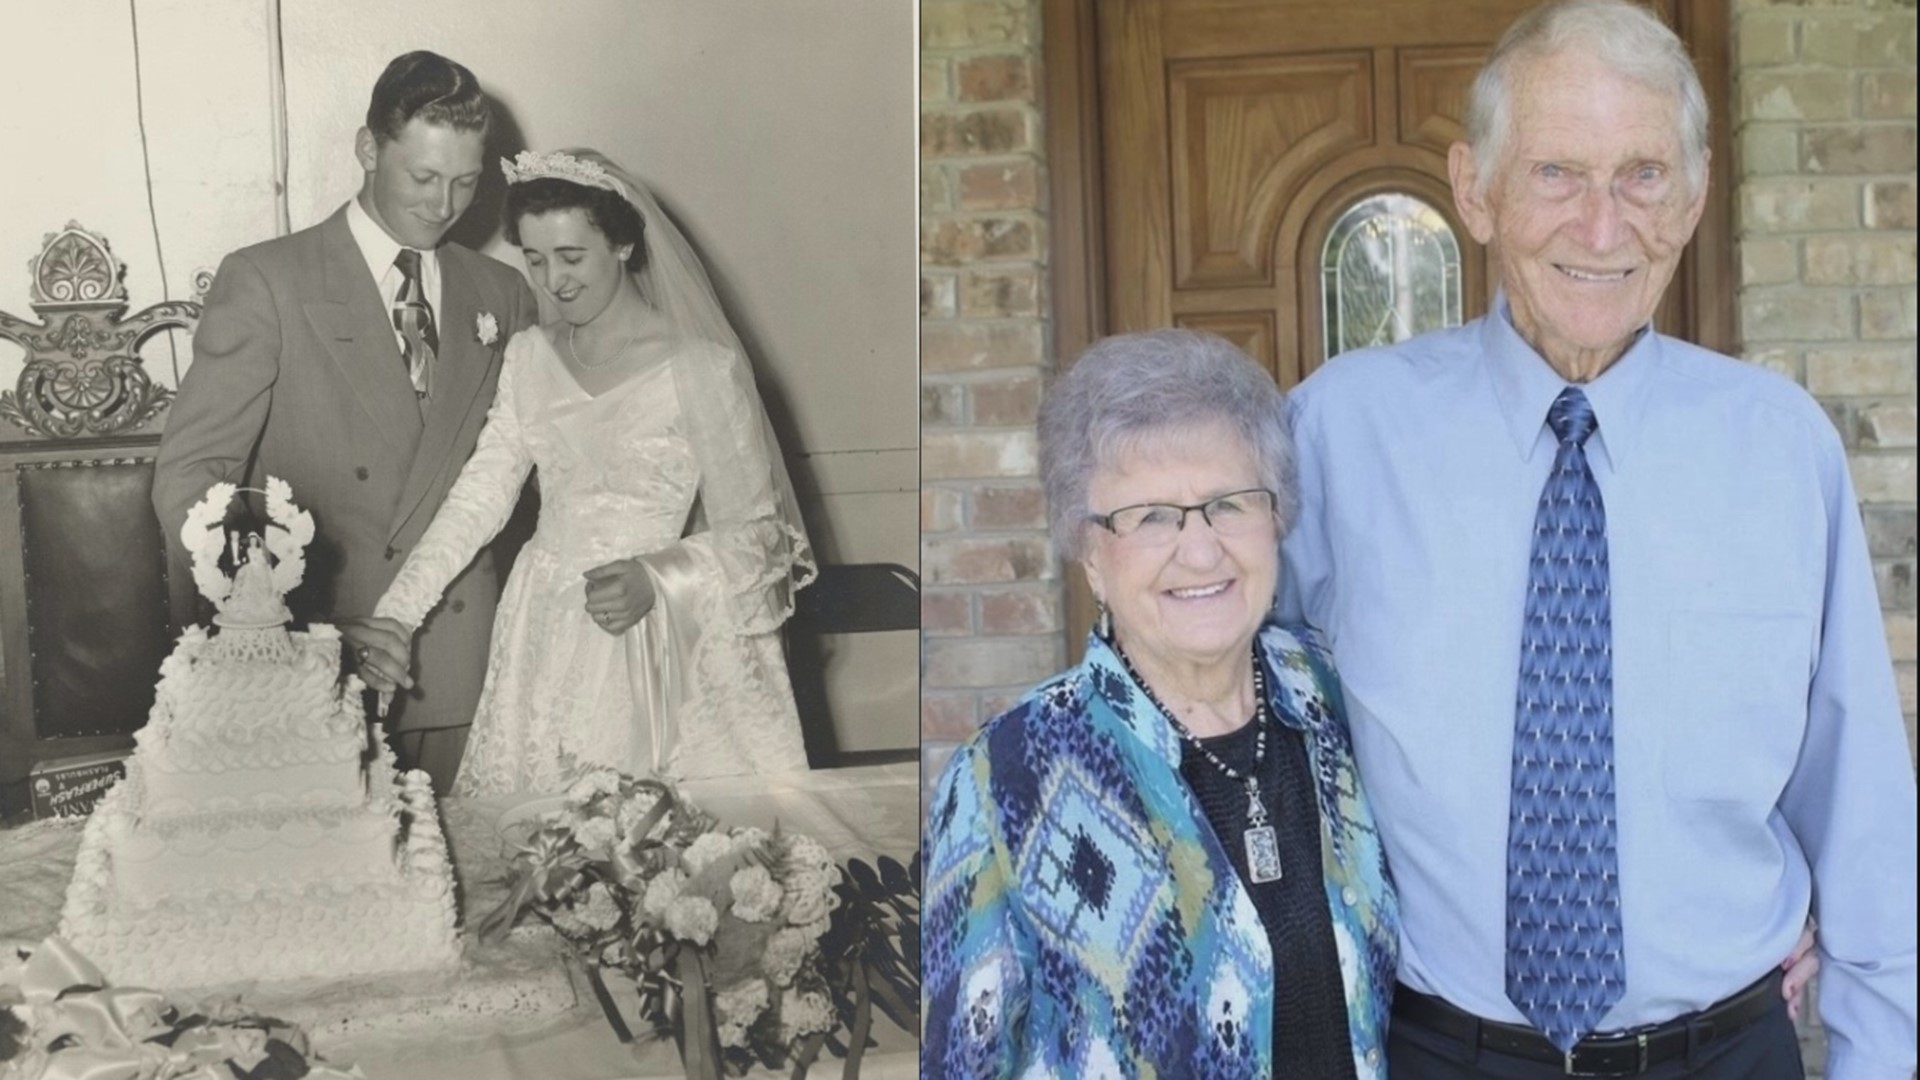 Harley and Joann Webb got married on Sept. 24, 1952 after meeting in February that year.